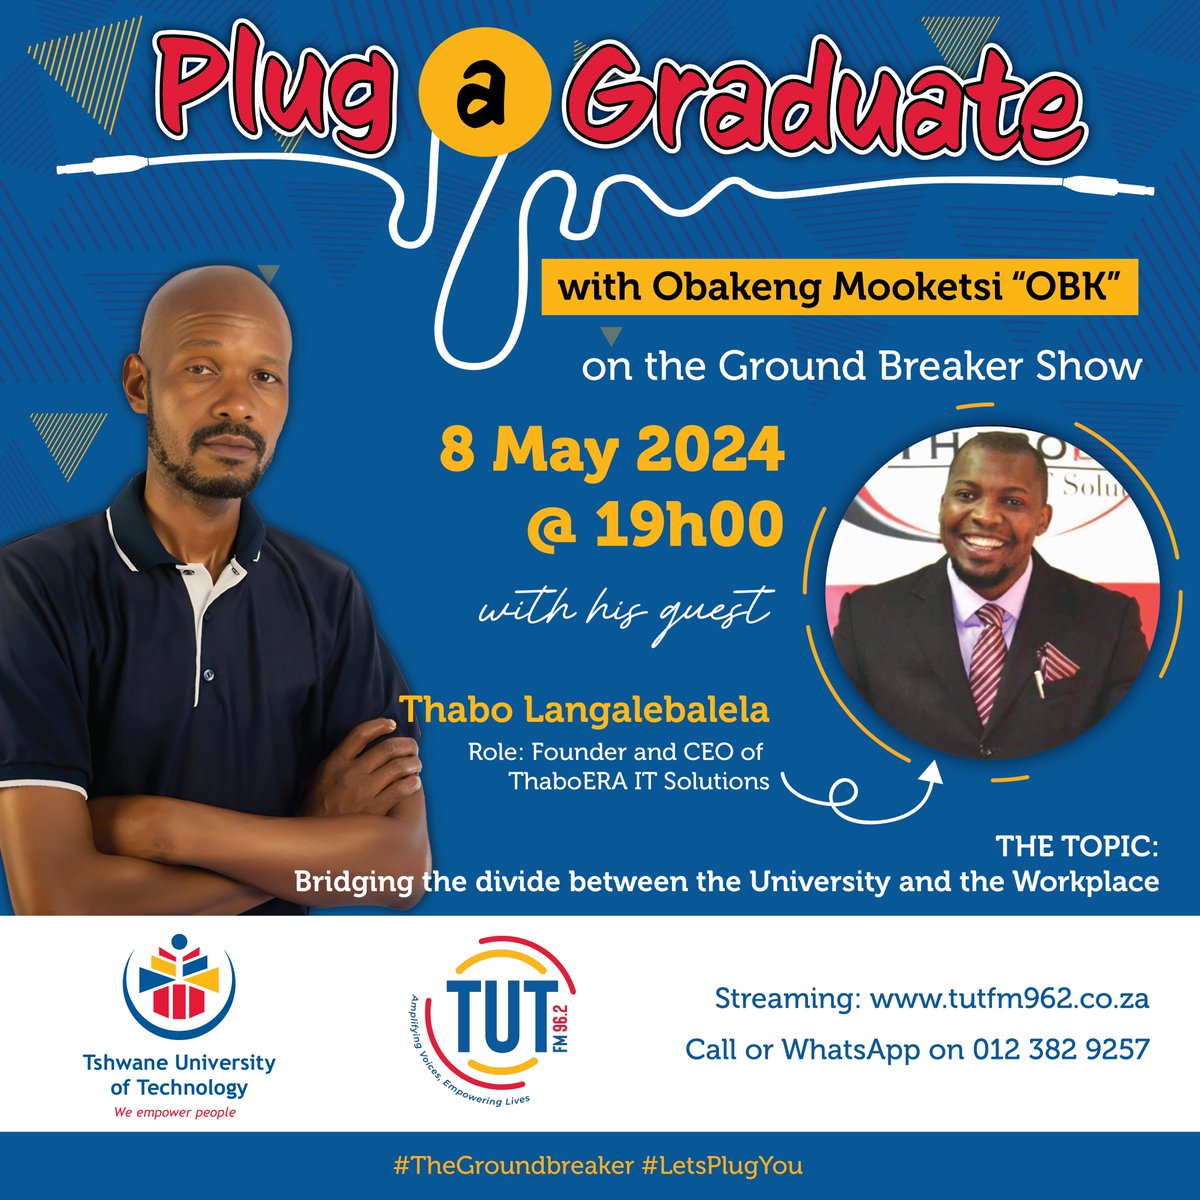 Hey TUT Fam! Catch the Plug-A-Graduate show tonight, when we host Thabo Langalebalela, TUT Alumnus and Managing Director of ThaboEra ICT Solutions. #LetsPlugYou #StrongerTogether An Alumni Relations Initiative, TUT FM 96.2 and the Directorate of Cooperative Education